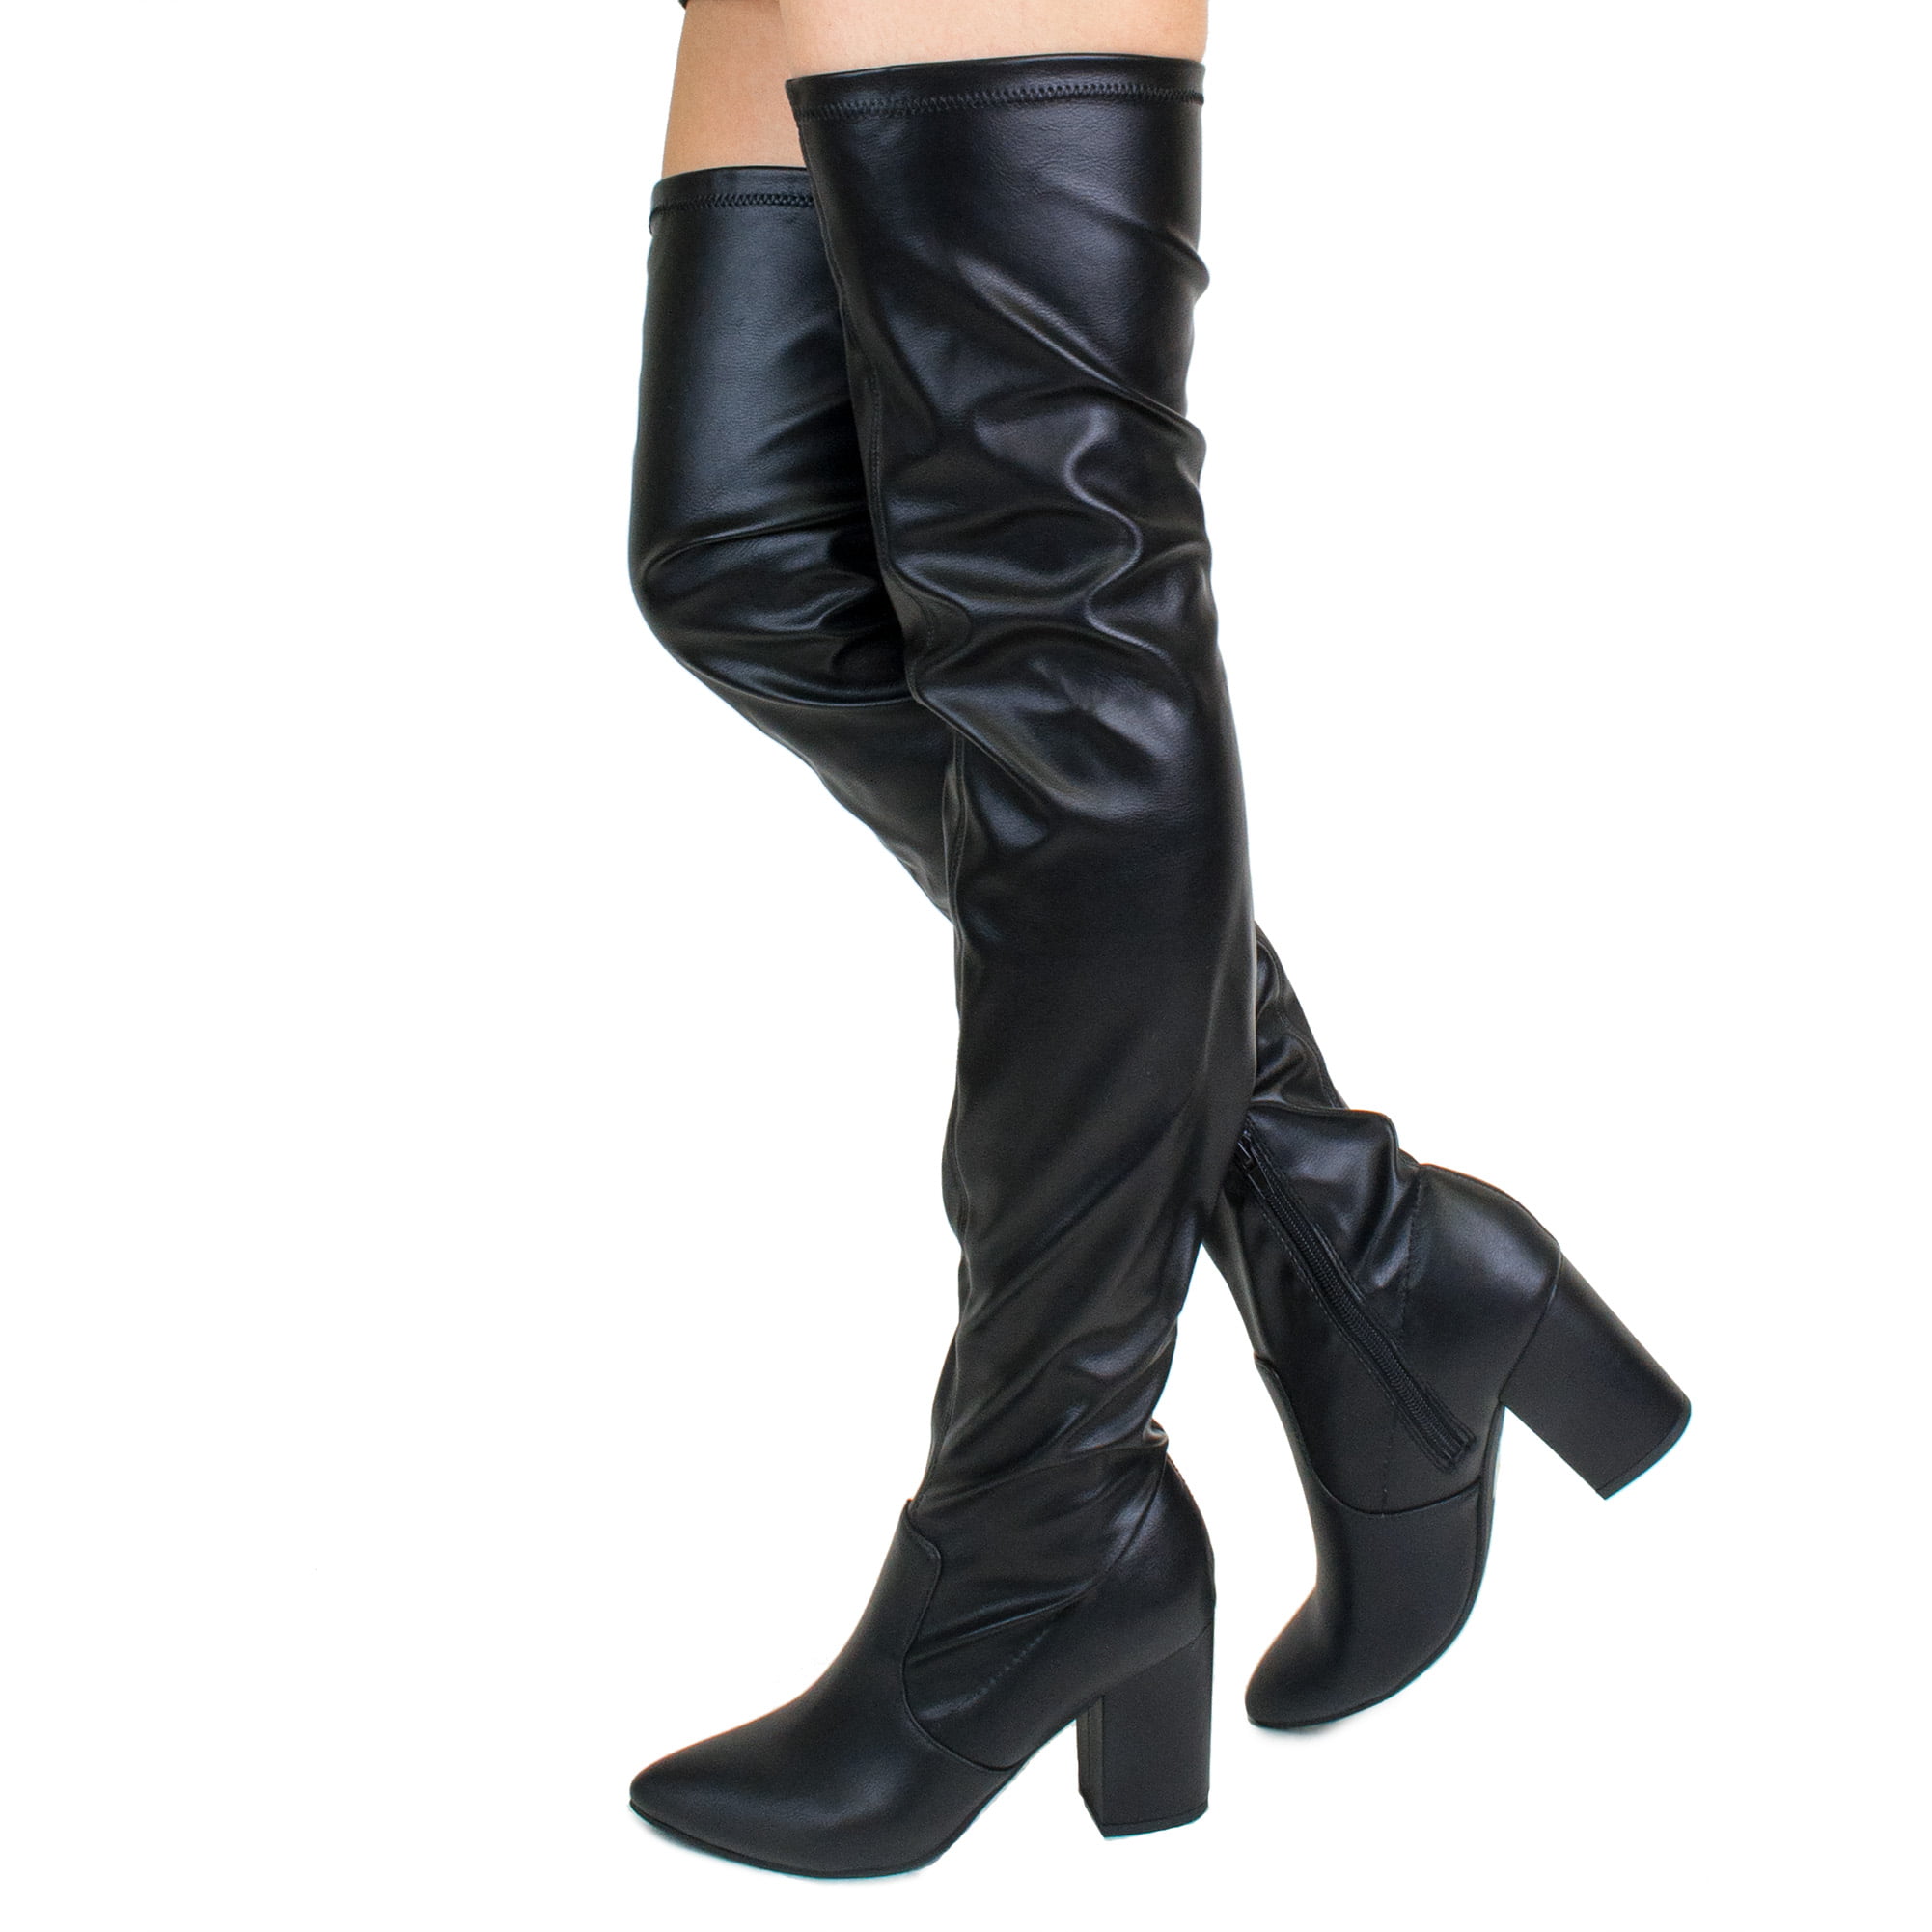 New Womens Thigh High Over The Knee Boots Low Heel Lace Up Sequin Flat Shoes 